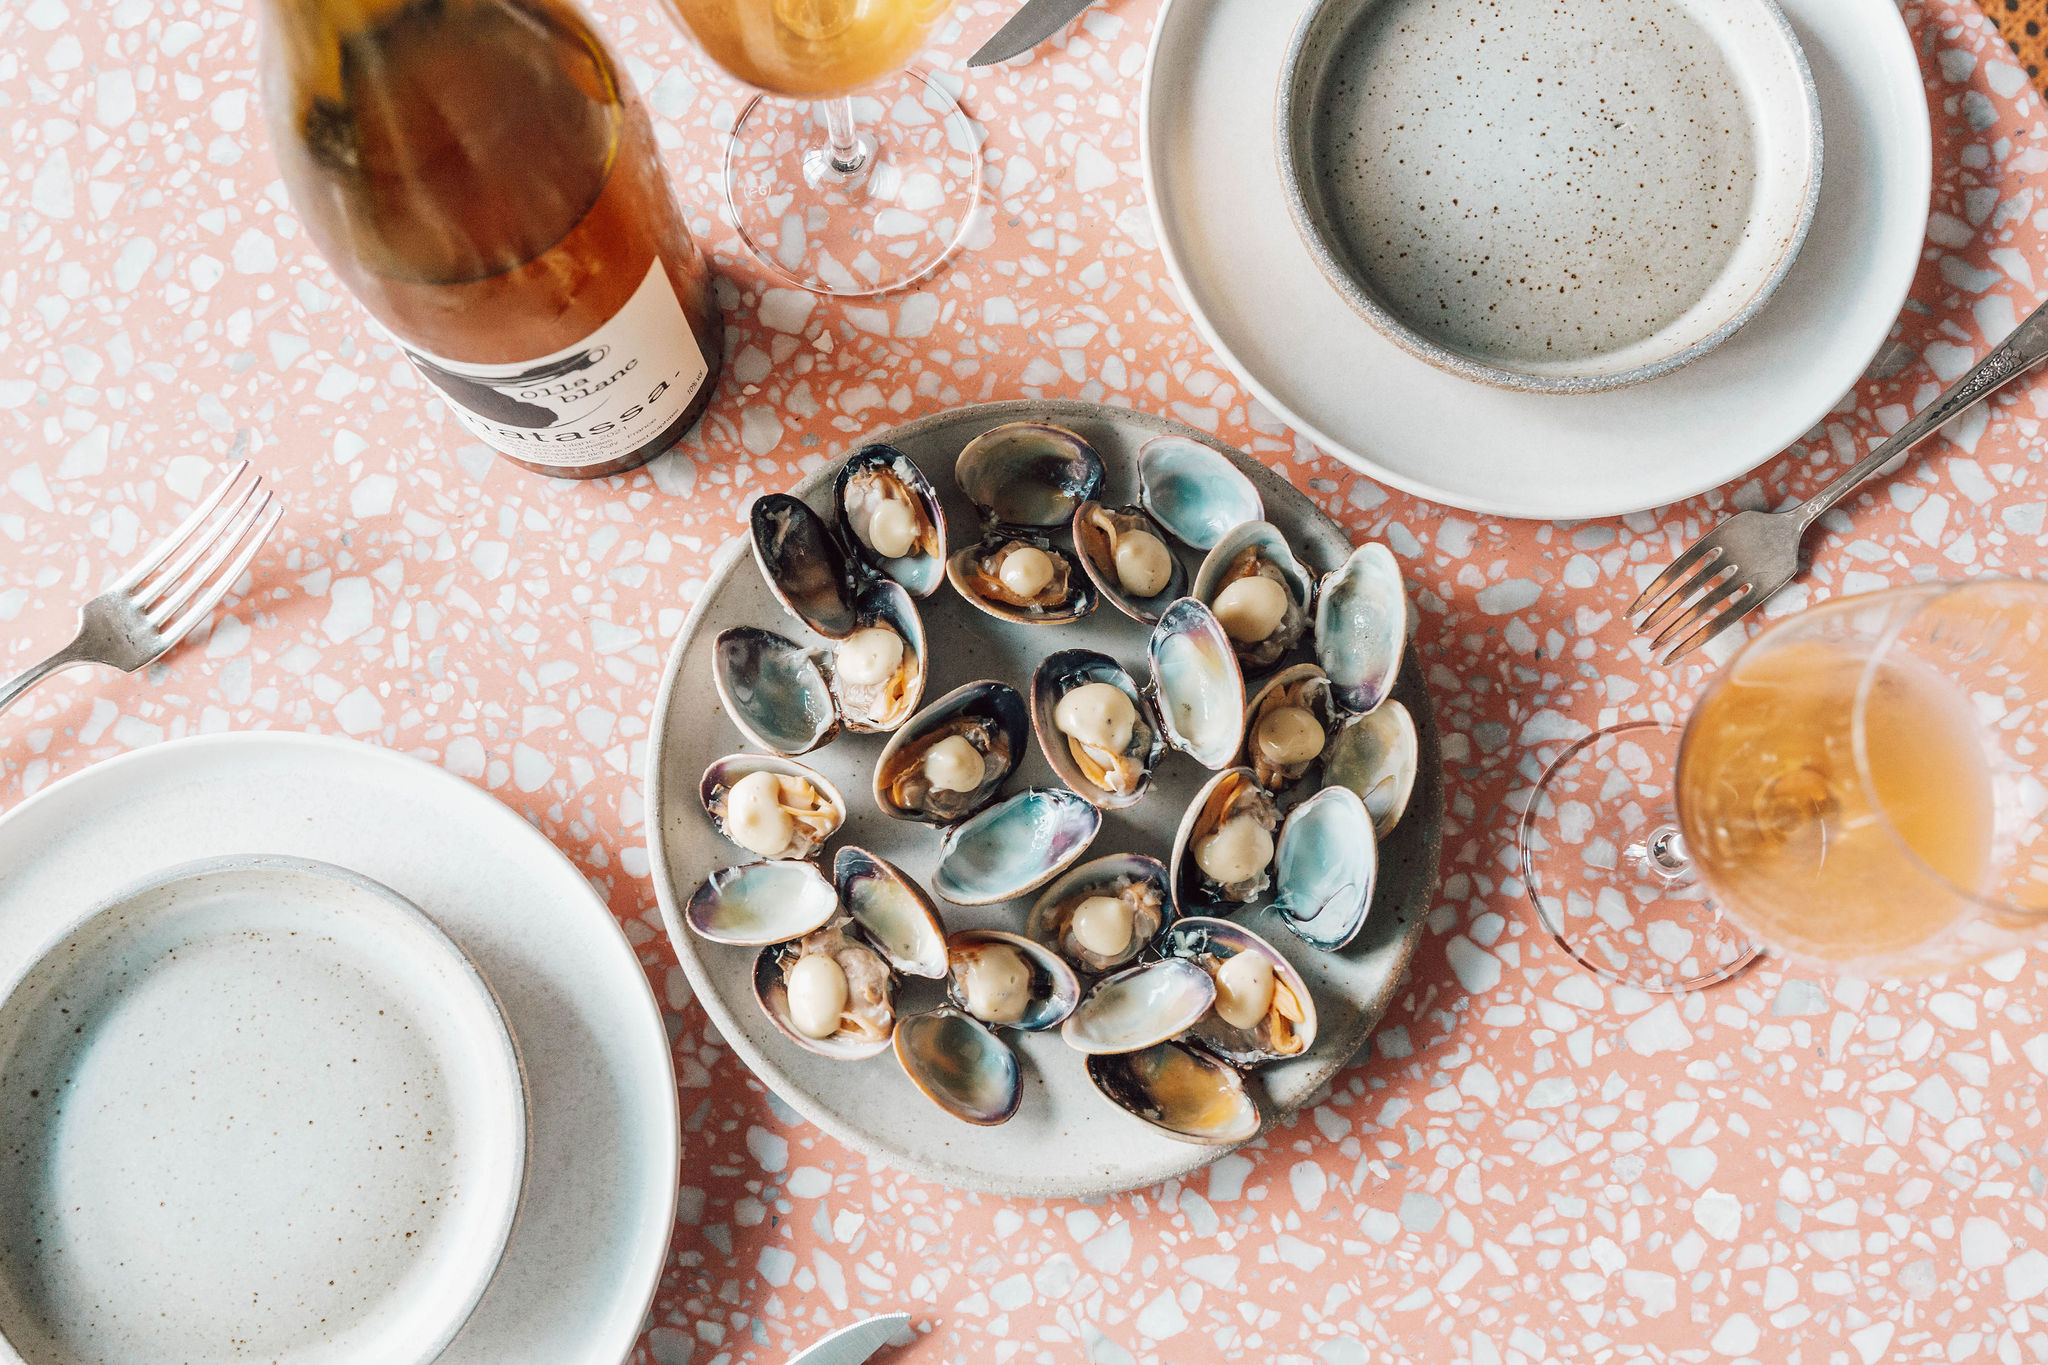 A plate of open clams sits at the center of a table next to two glasses of orange wine at Heavenly Creatures.